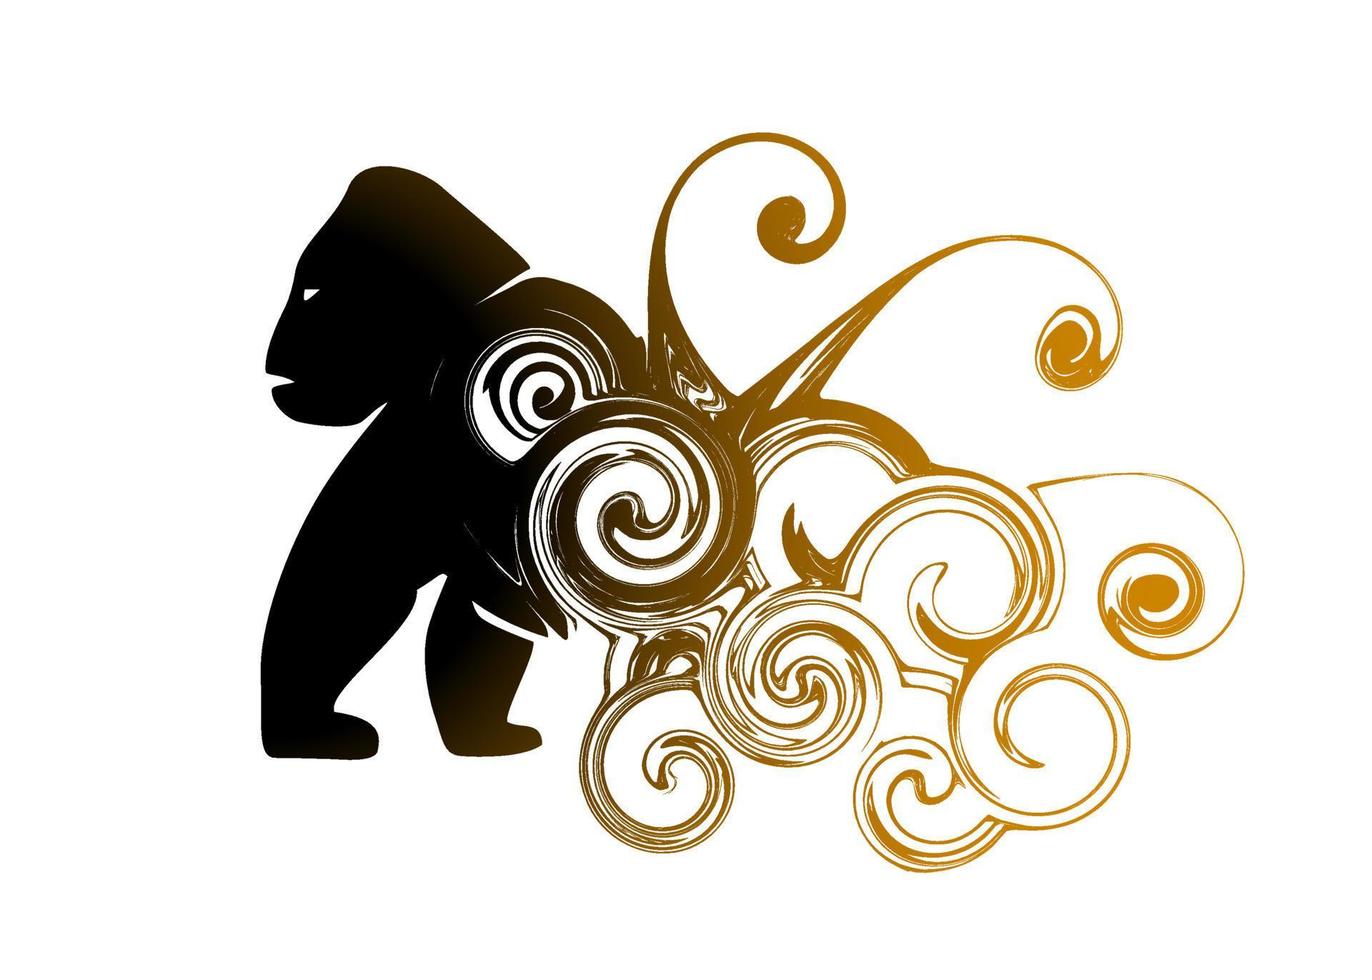 Beautiful Abstract and colorful Gorilla Walking Silhouette wallpaper background painting vector